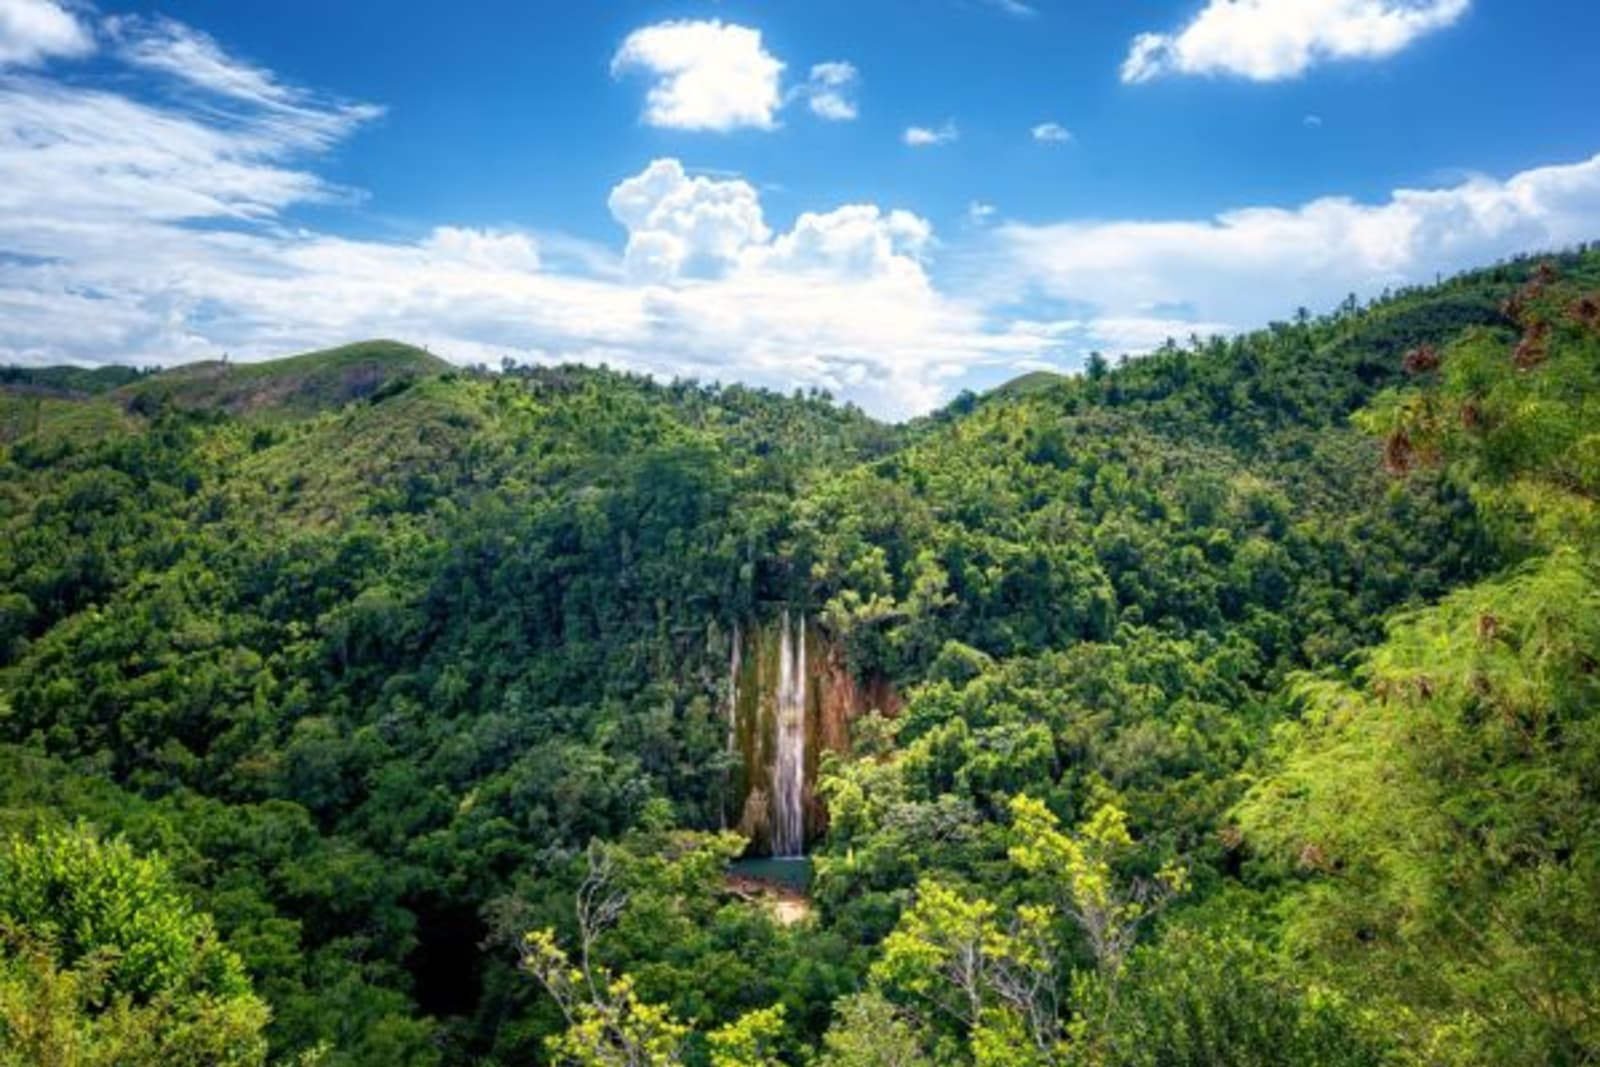 The El Limon waterfall in the Dominican Republic